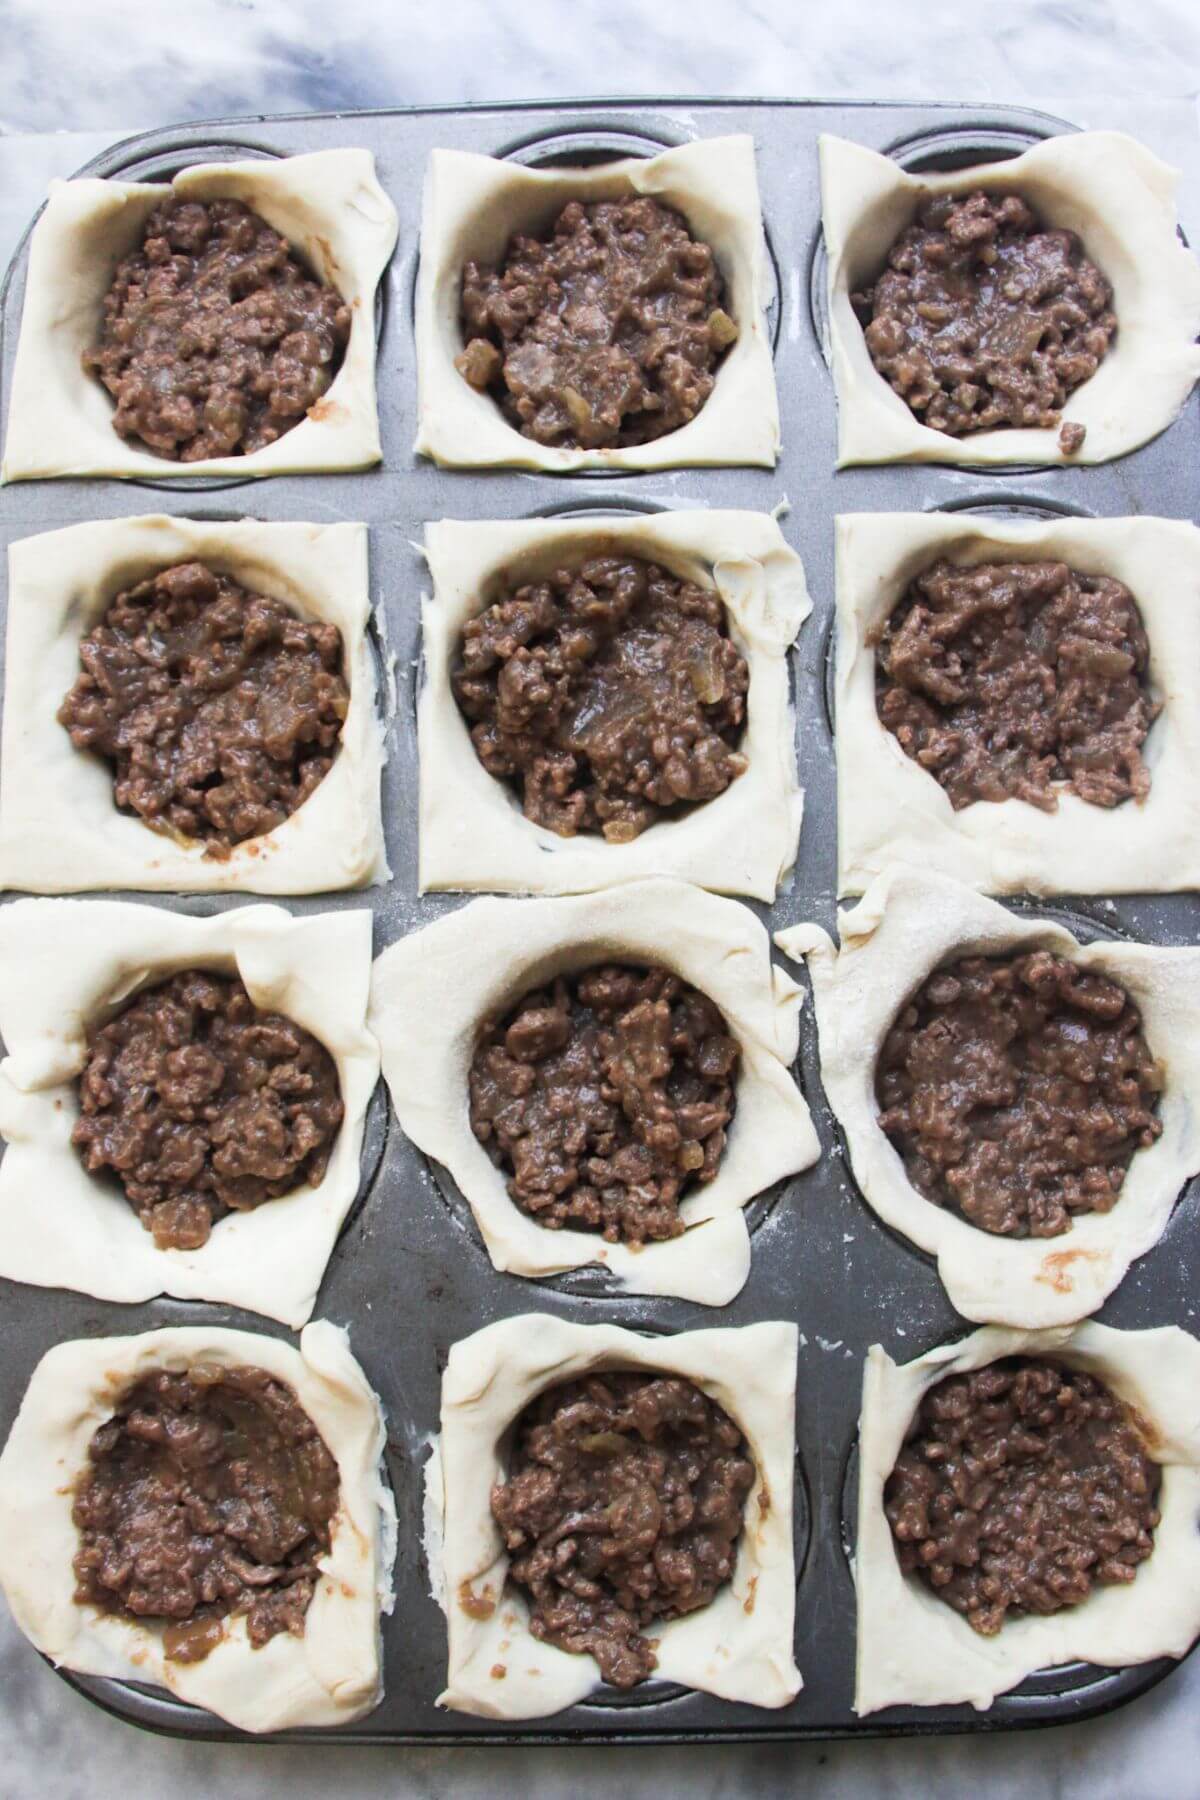 Beef mince inside pastry inside a 12 piece muffin tin.